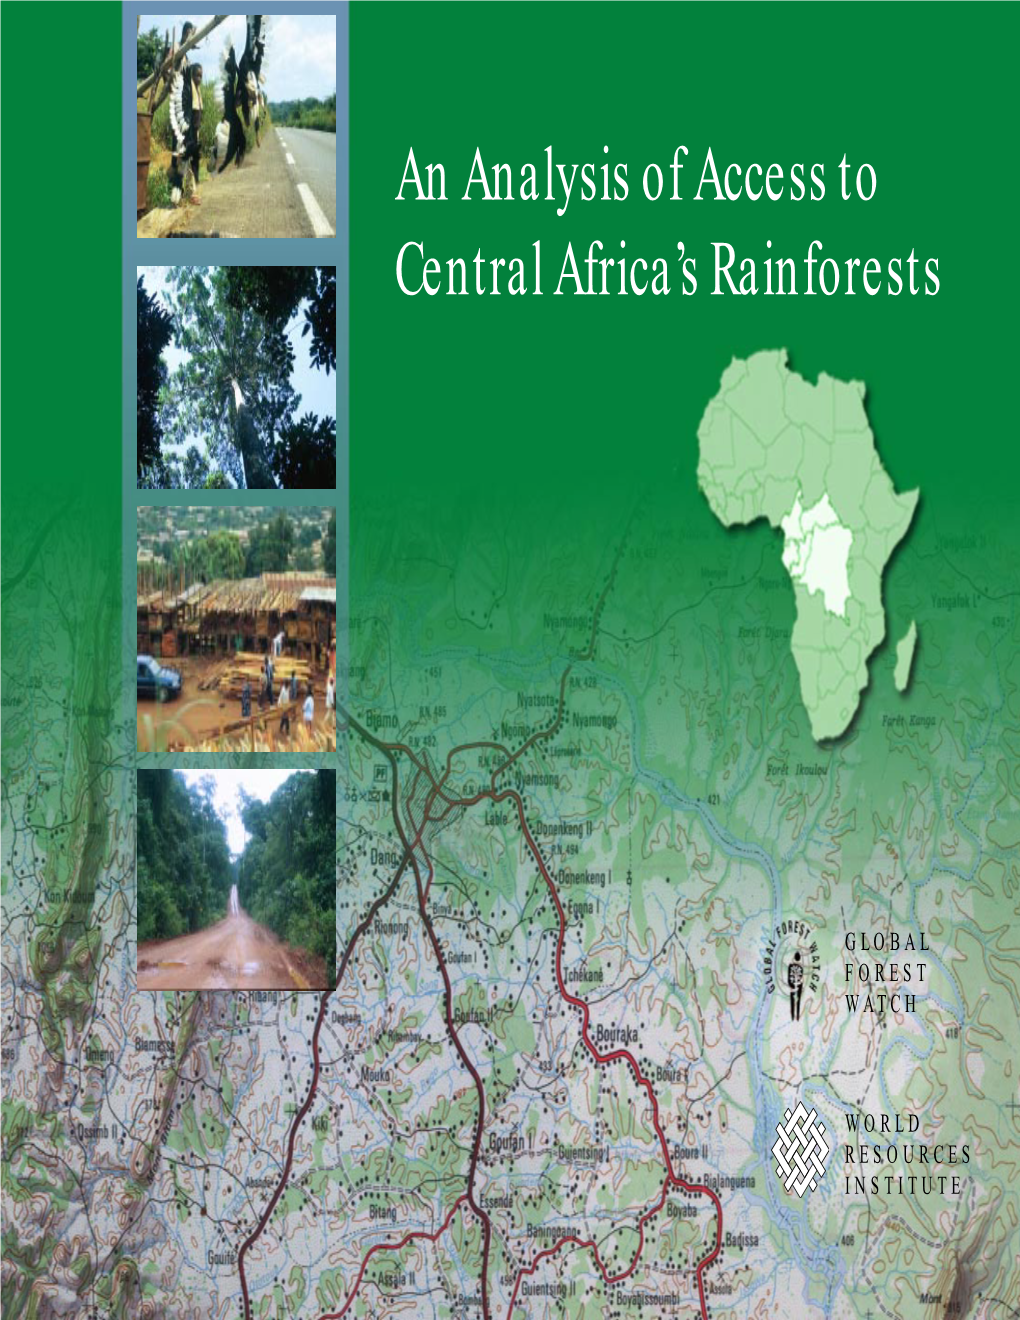 An Analysis of Access to Central Africa's Rainforests